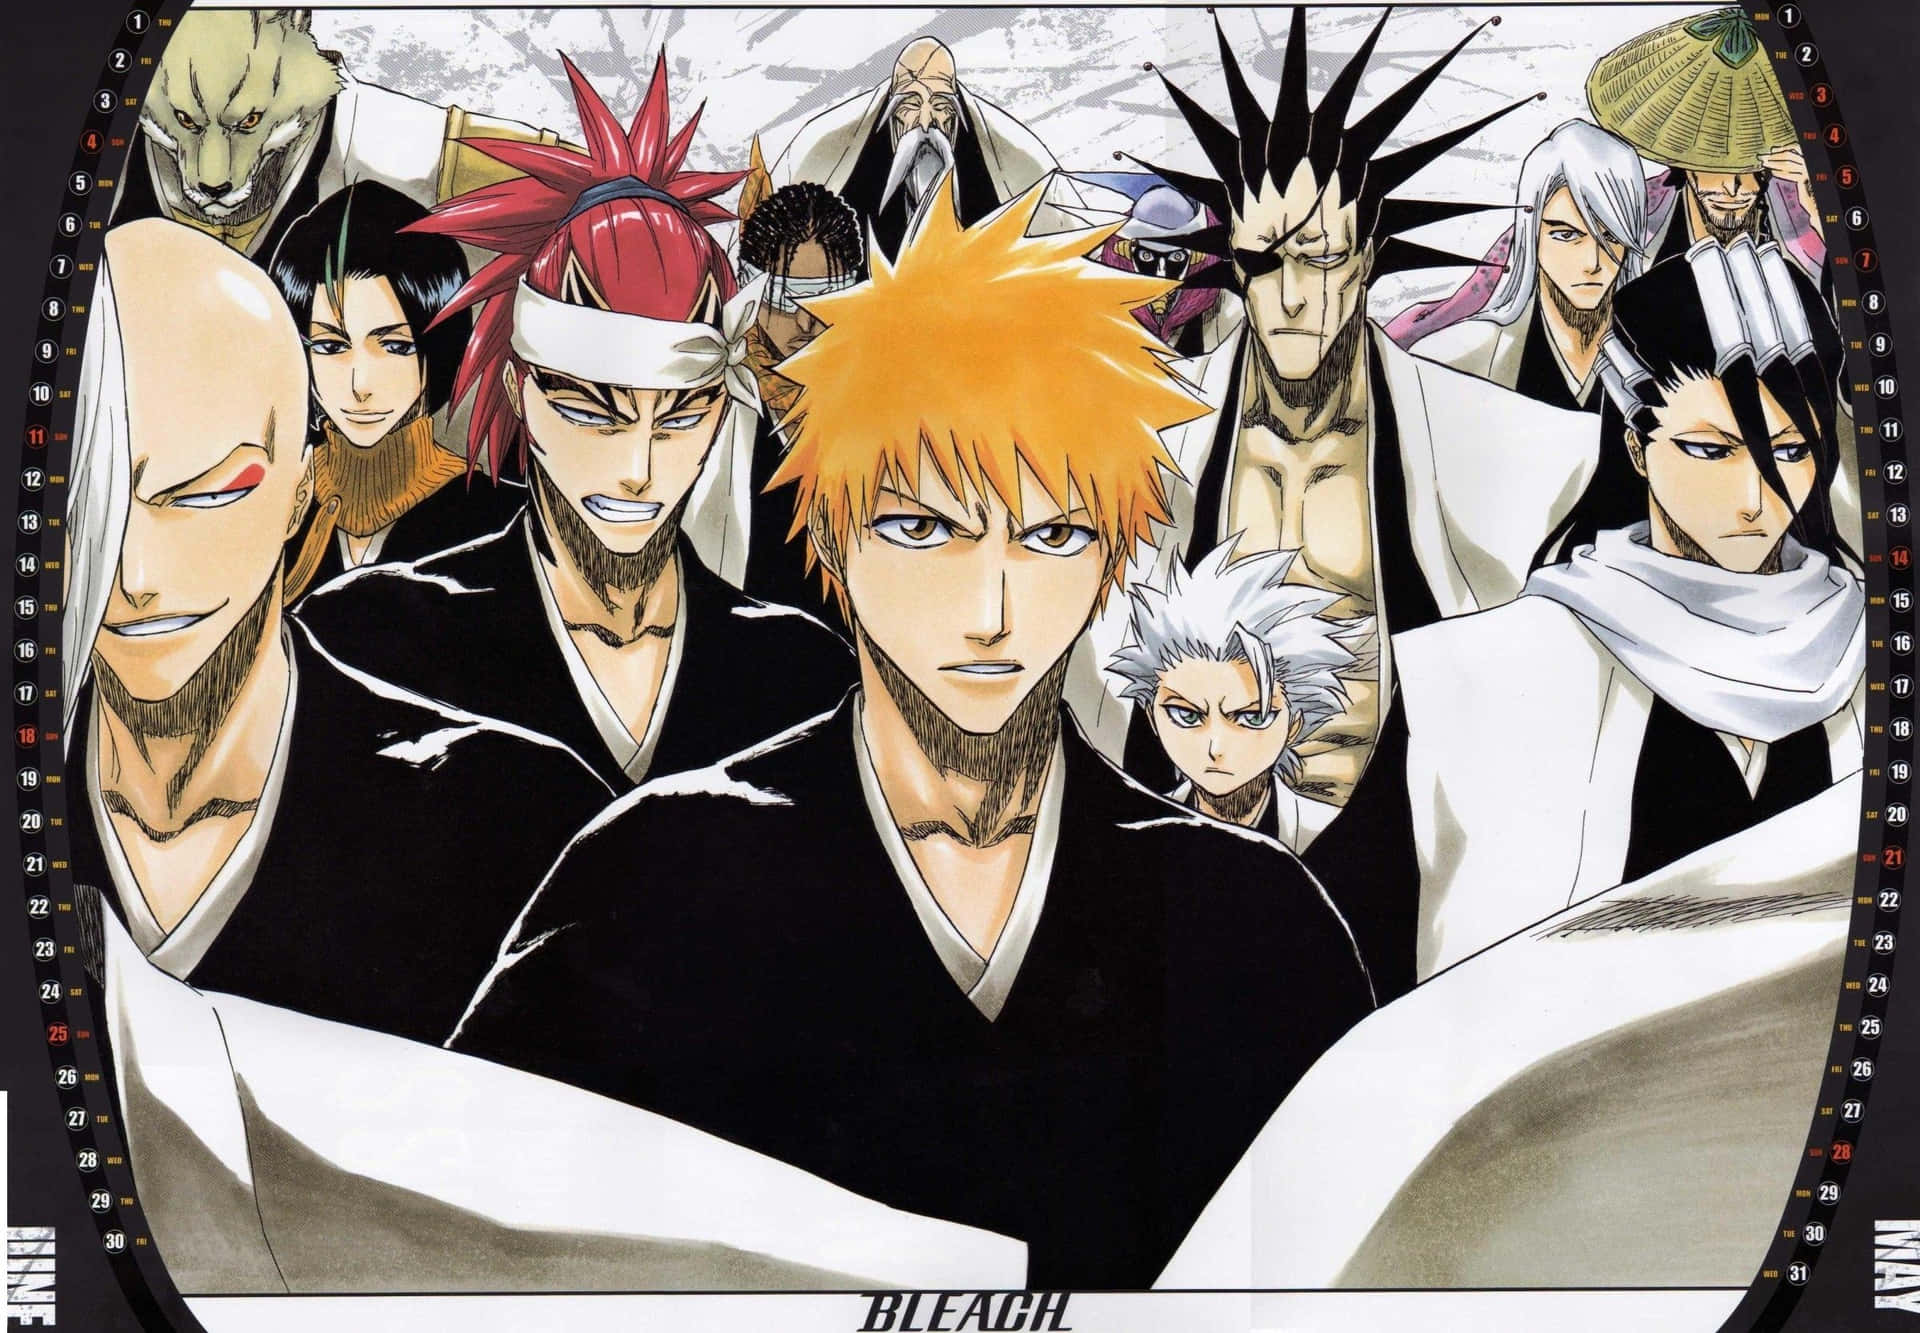 Explore the world of Bleach!